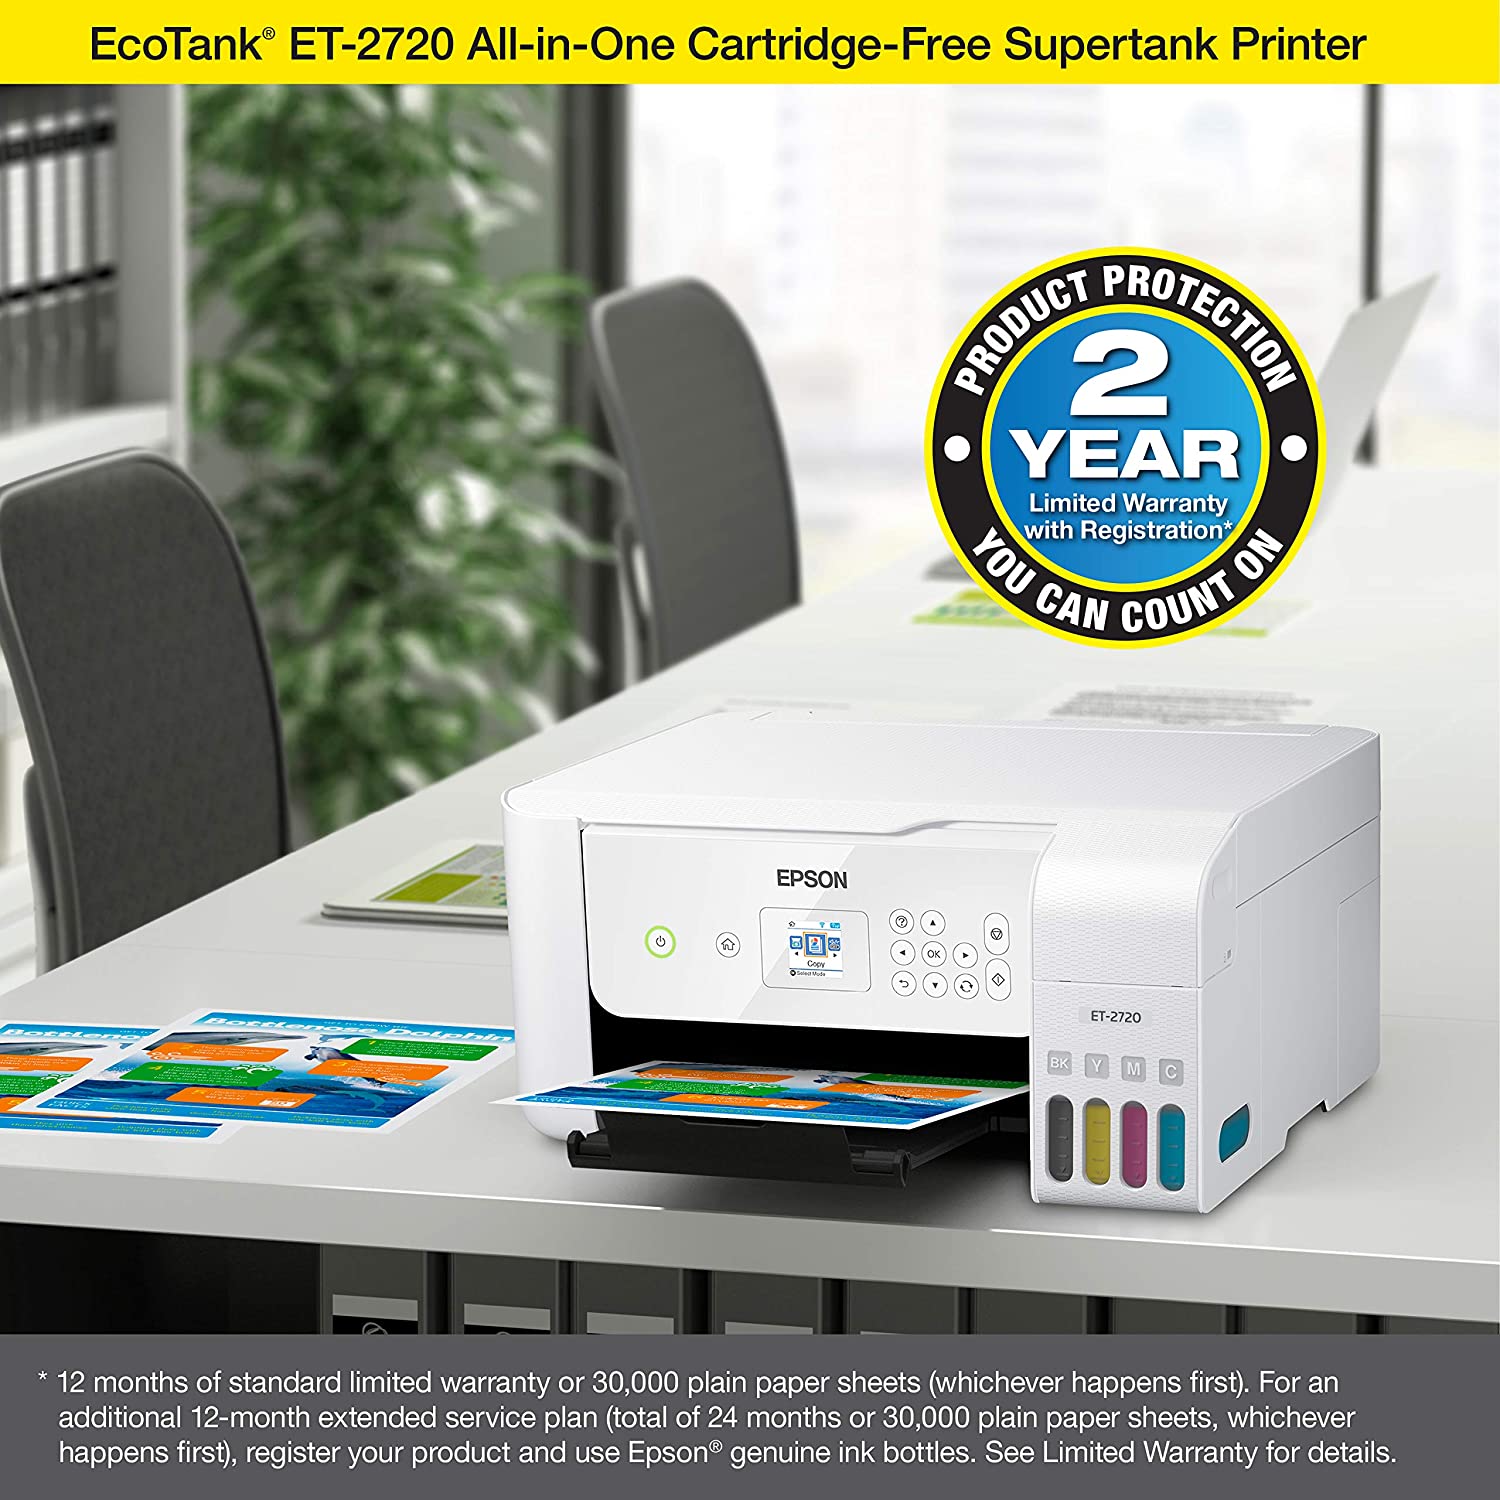 Epson EcoTank ET-2720 Wireless All-in-One Color Supertank Printer - White - image 2 of 6